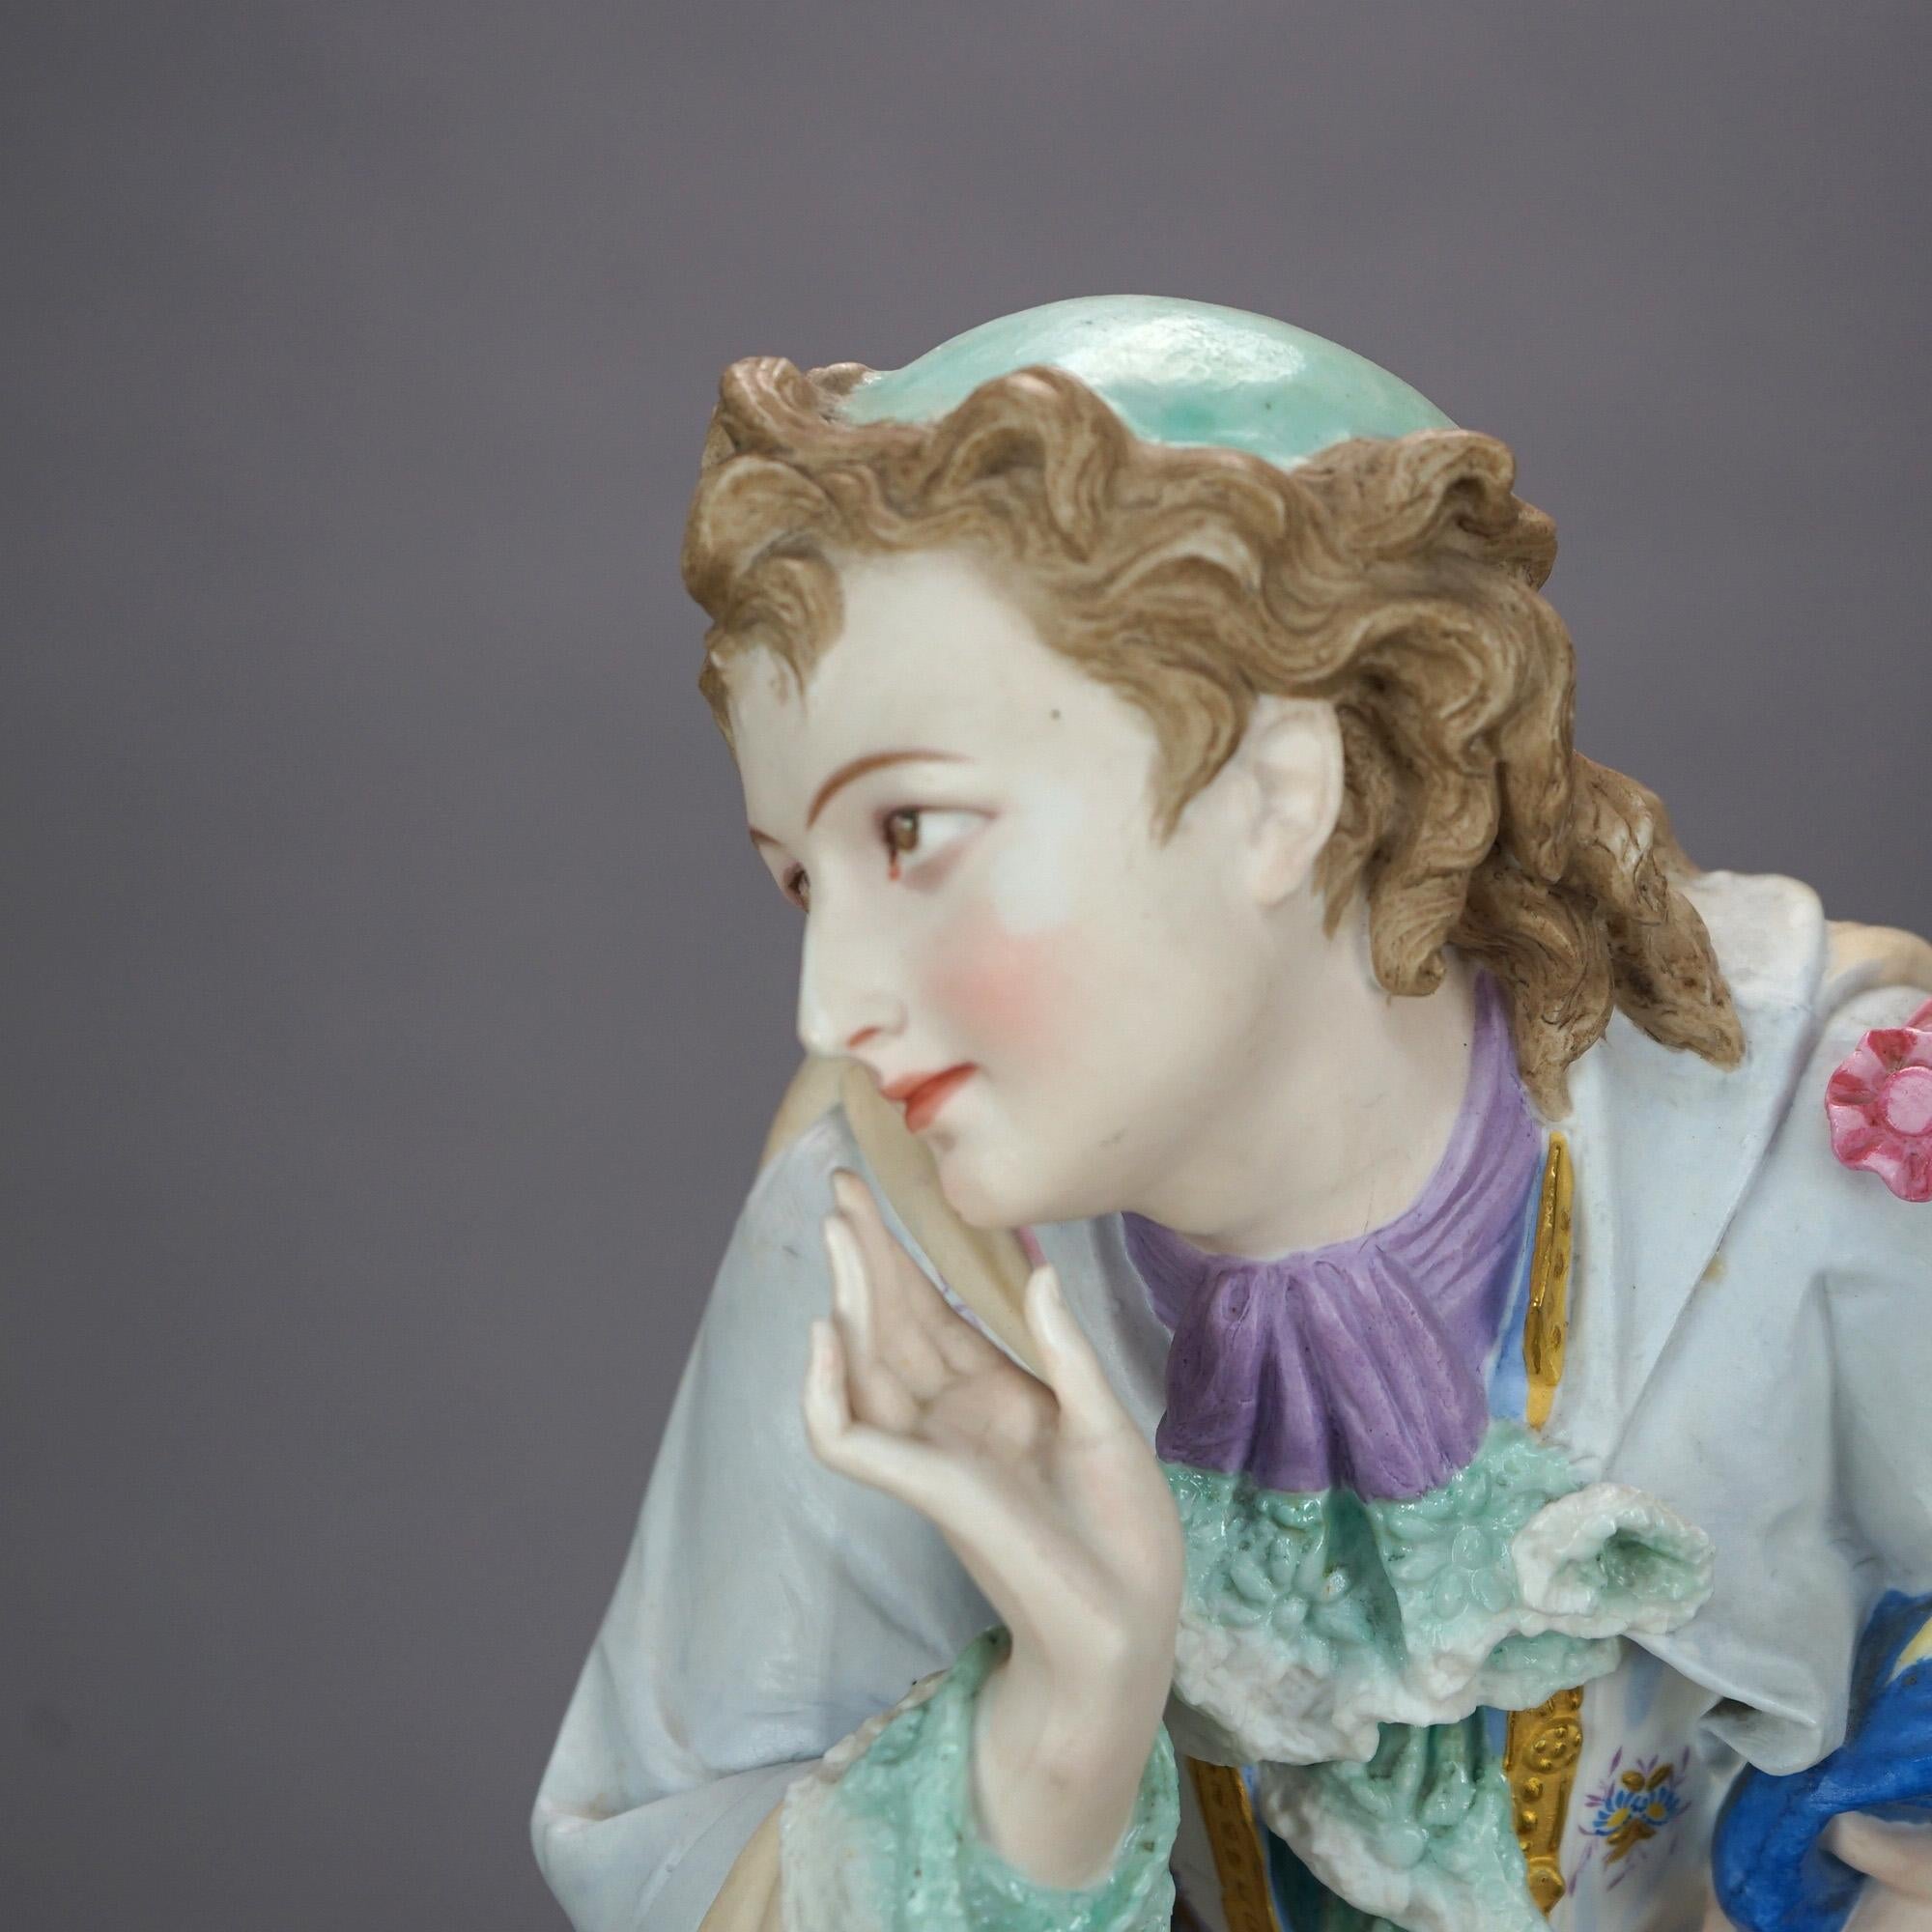 Hand-Painted Antique Oversized Chelsea or Vion Bisque Porcelain Figure of a Young Man, 19th C